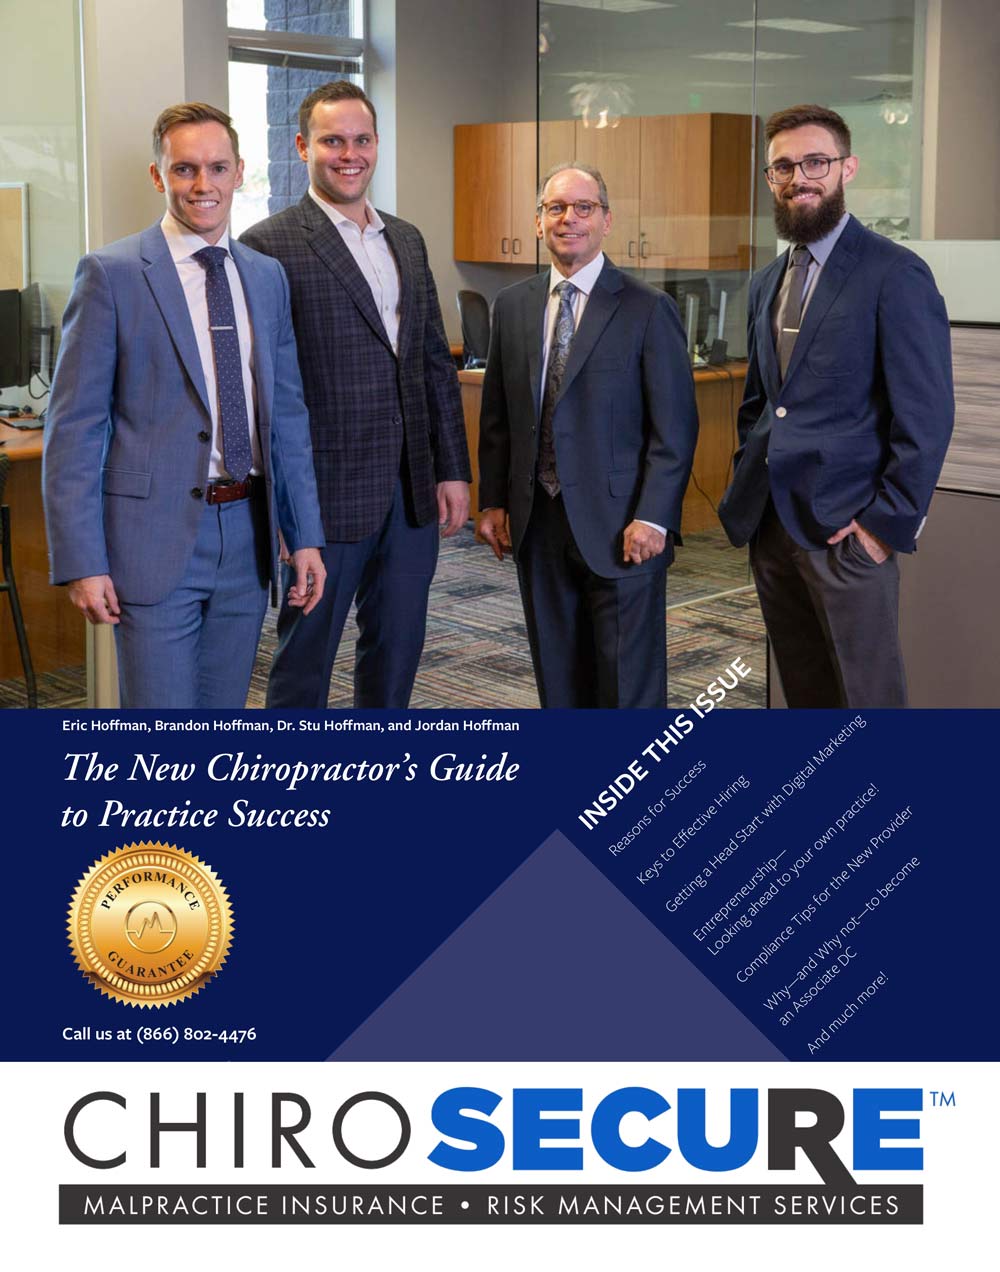 ChiroSecure - A New Doctor's Guide to Practice Success